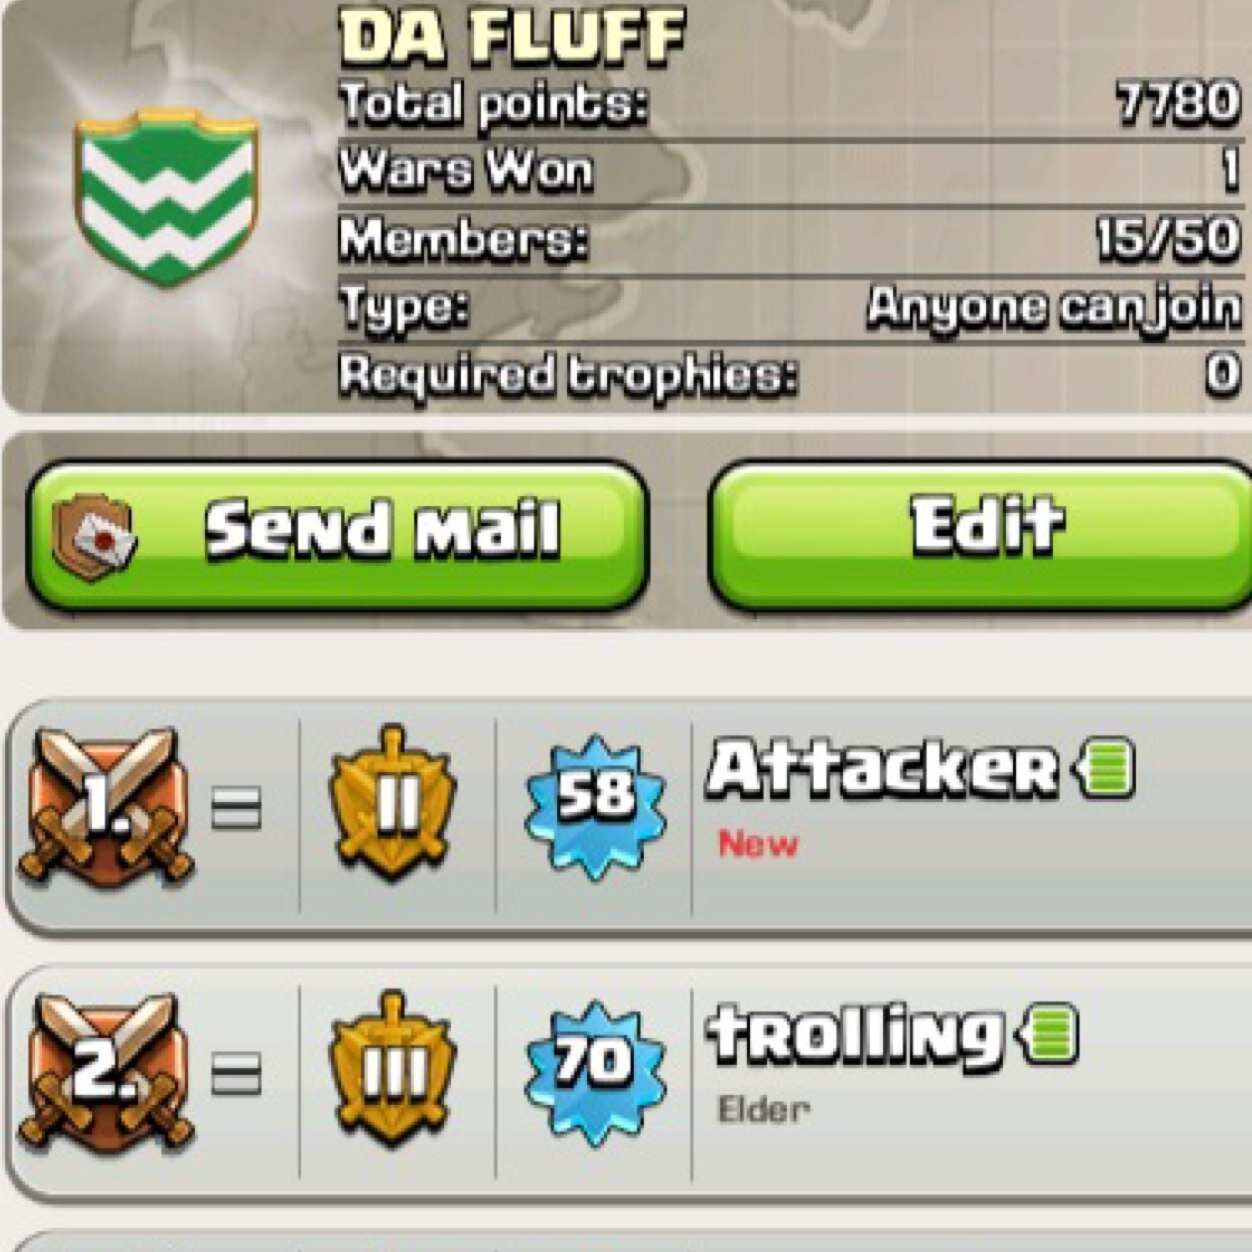 WE R THE DA FLUFF CLANALL WE WANT IS FOR PEOPLE WHO LOVE CLASH OF CLANS TO JOINIF YOU SAID YOU JOINED BECAUSE OF THE TWITTER ACCOUNT YOU GET ELDER